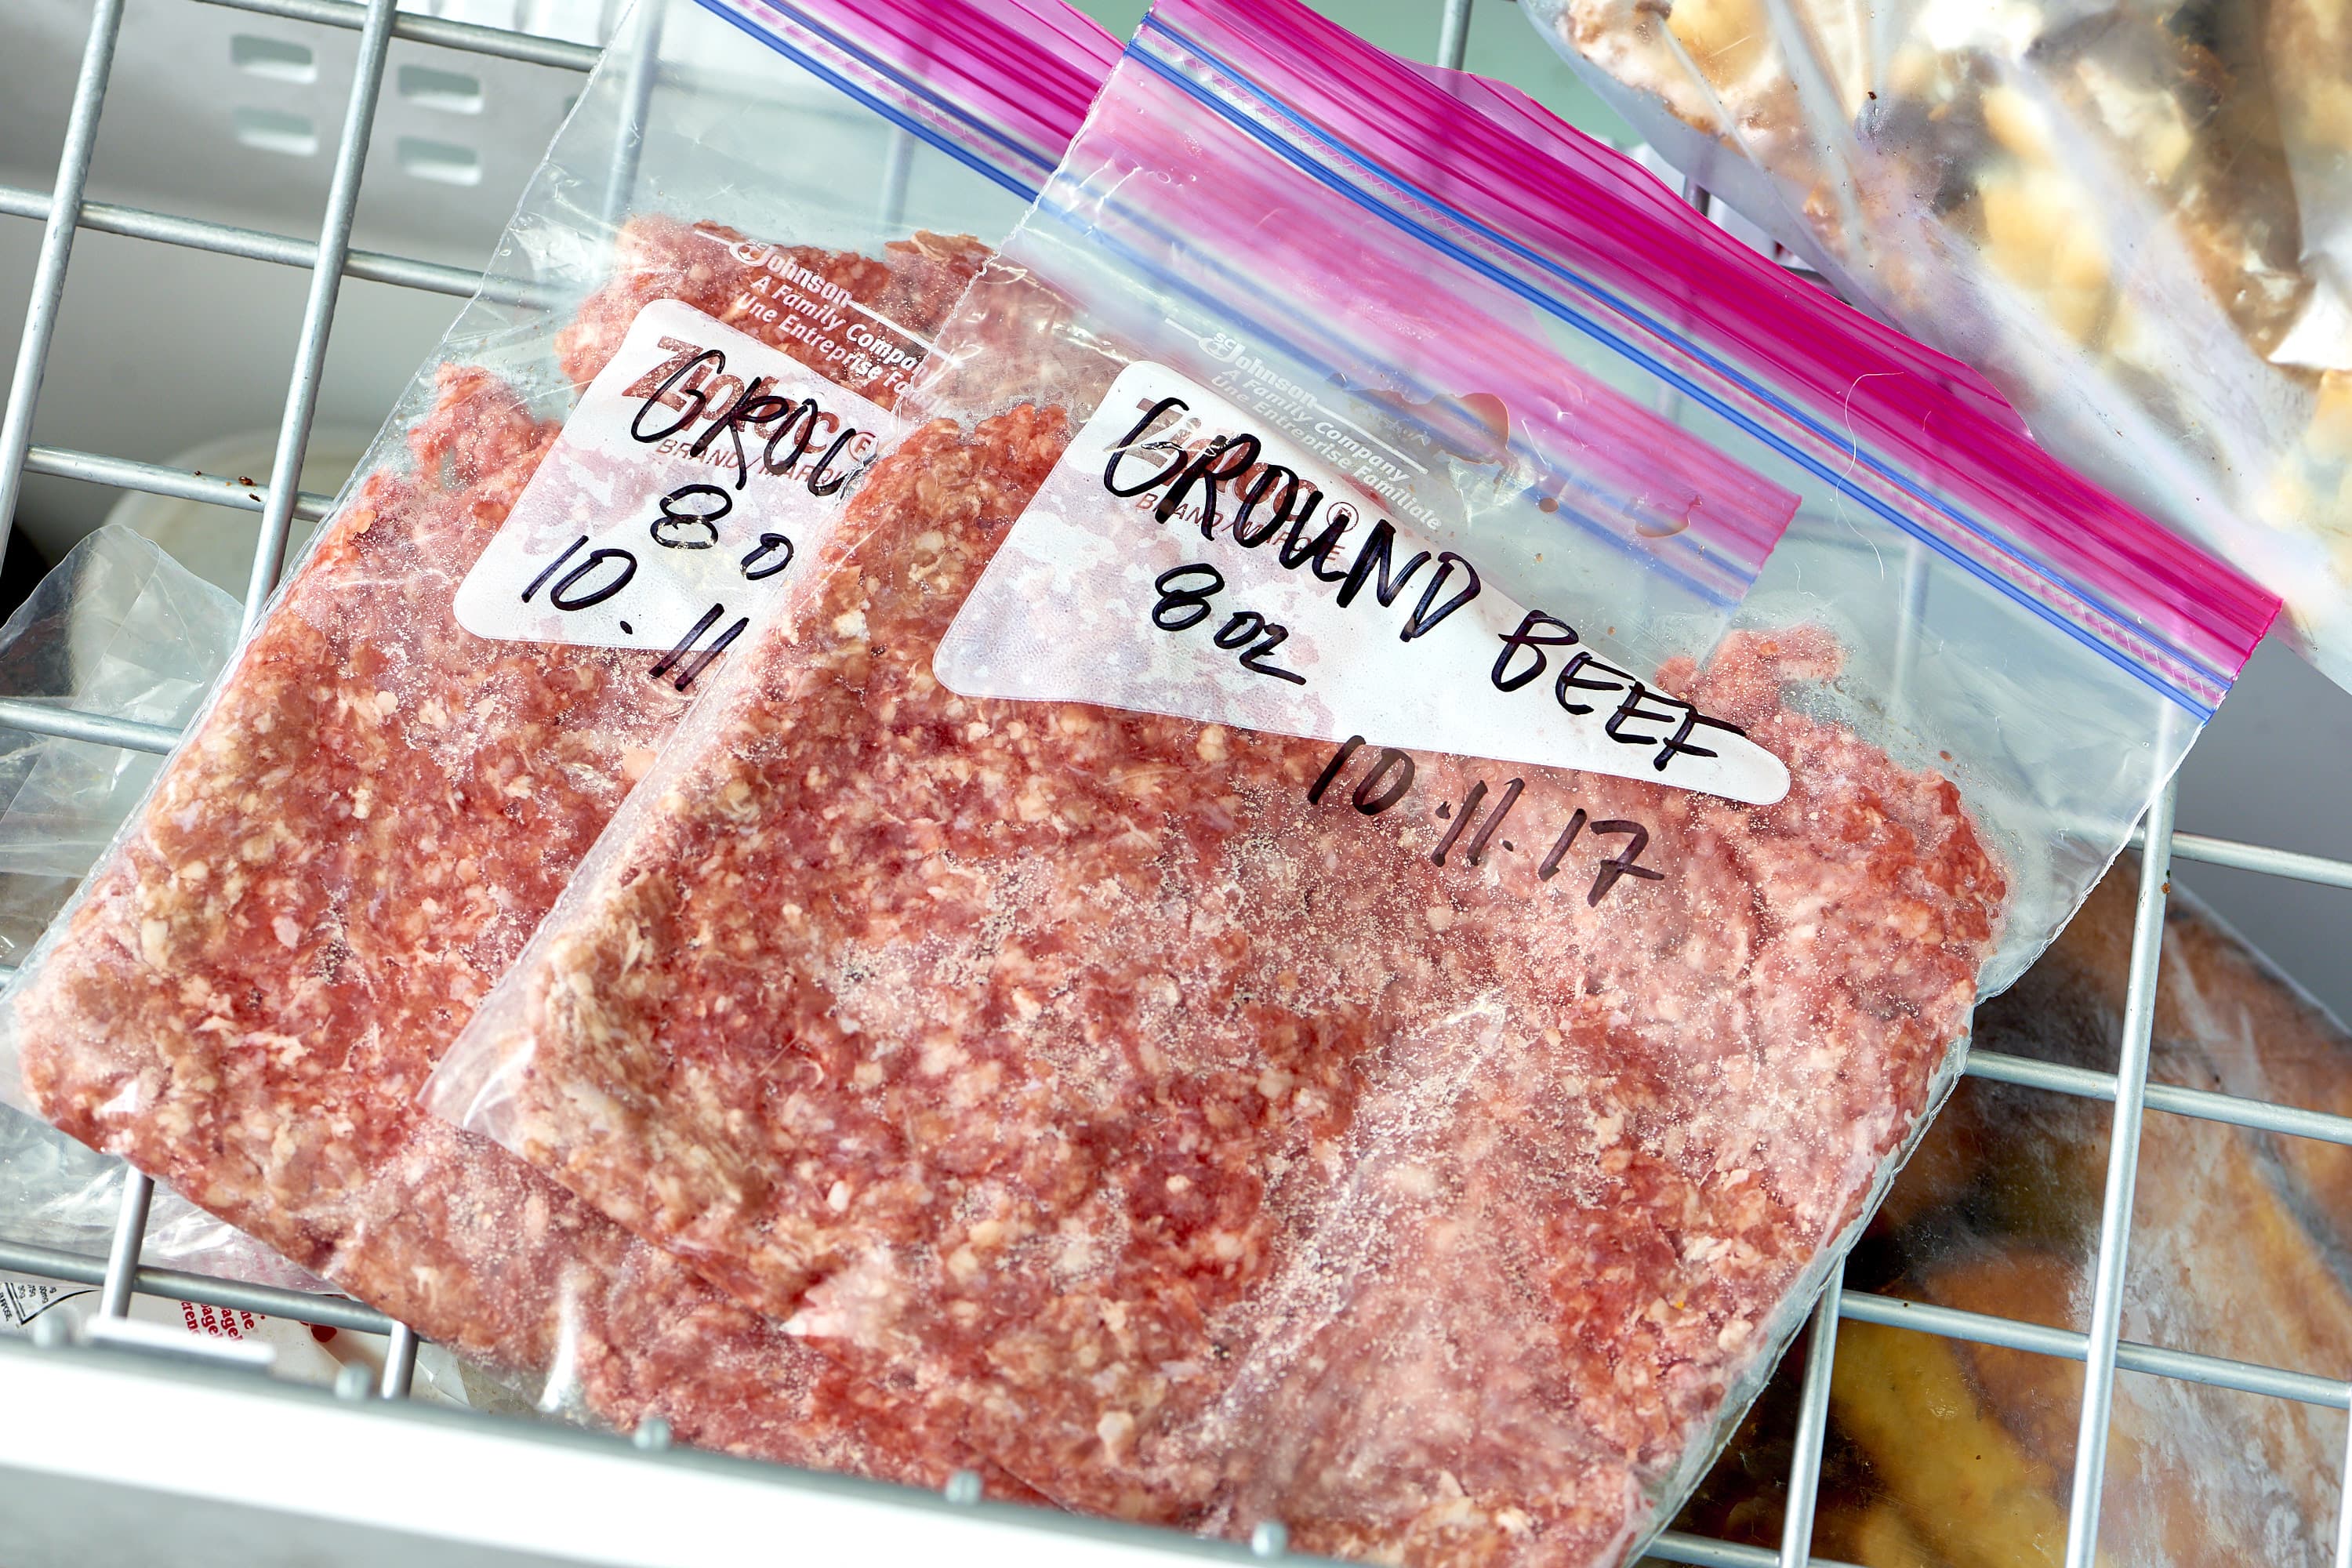 How to Defrost Ground Beef: A Safe, Step-By-Step Guide